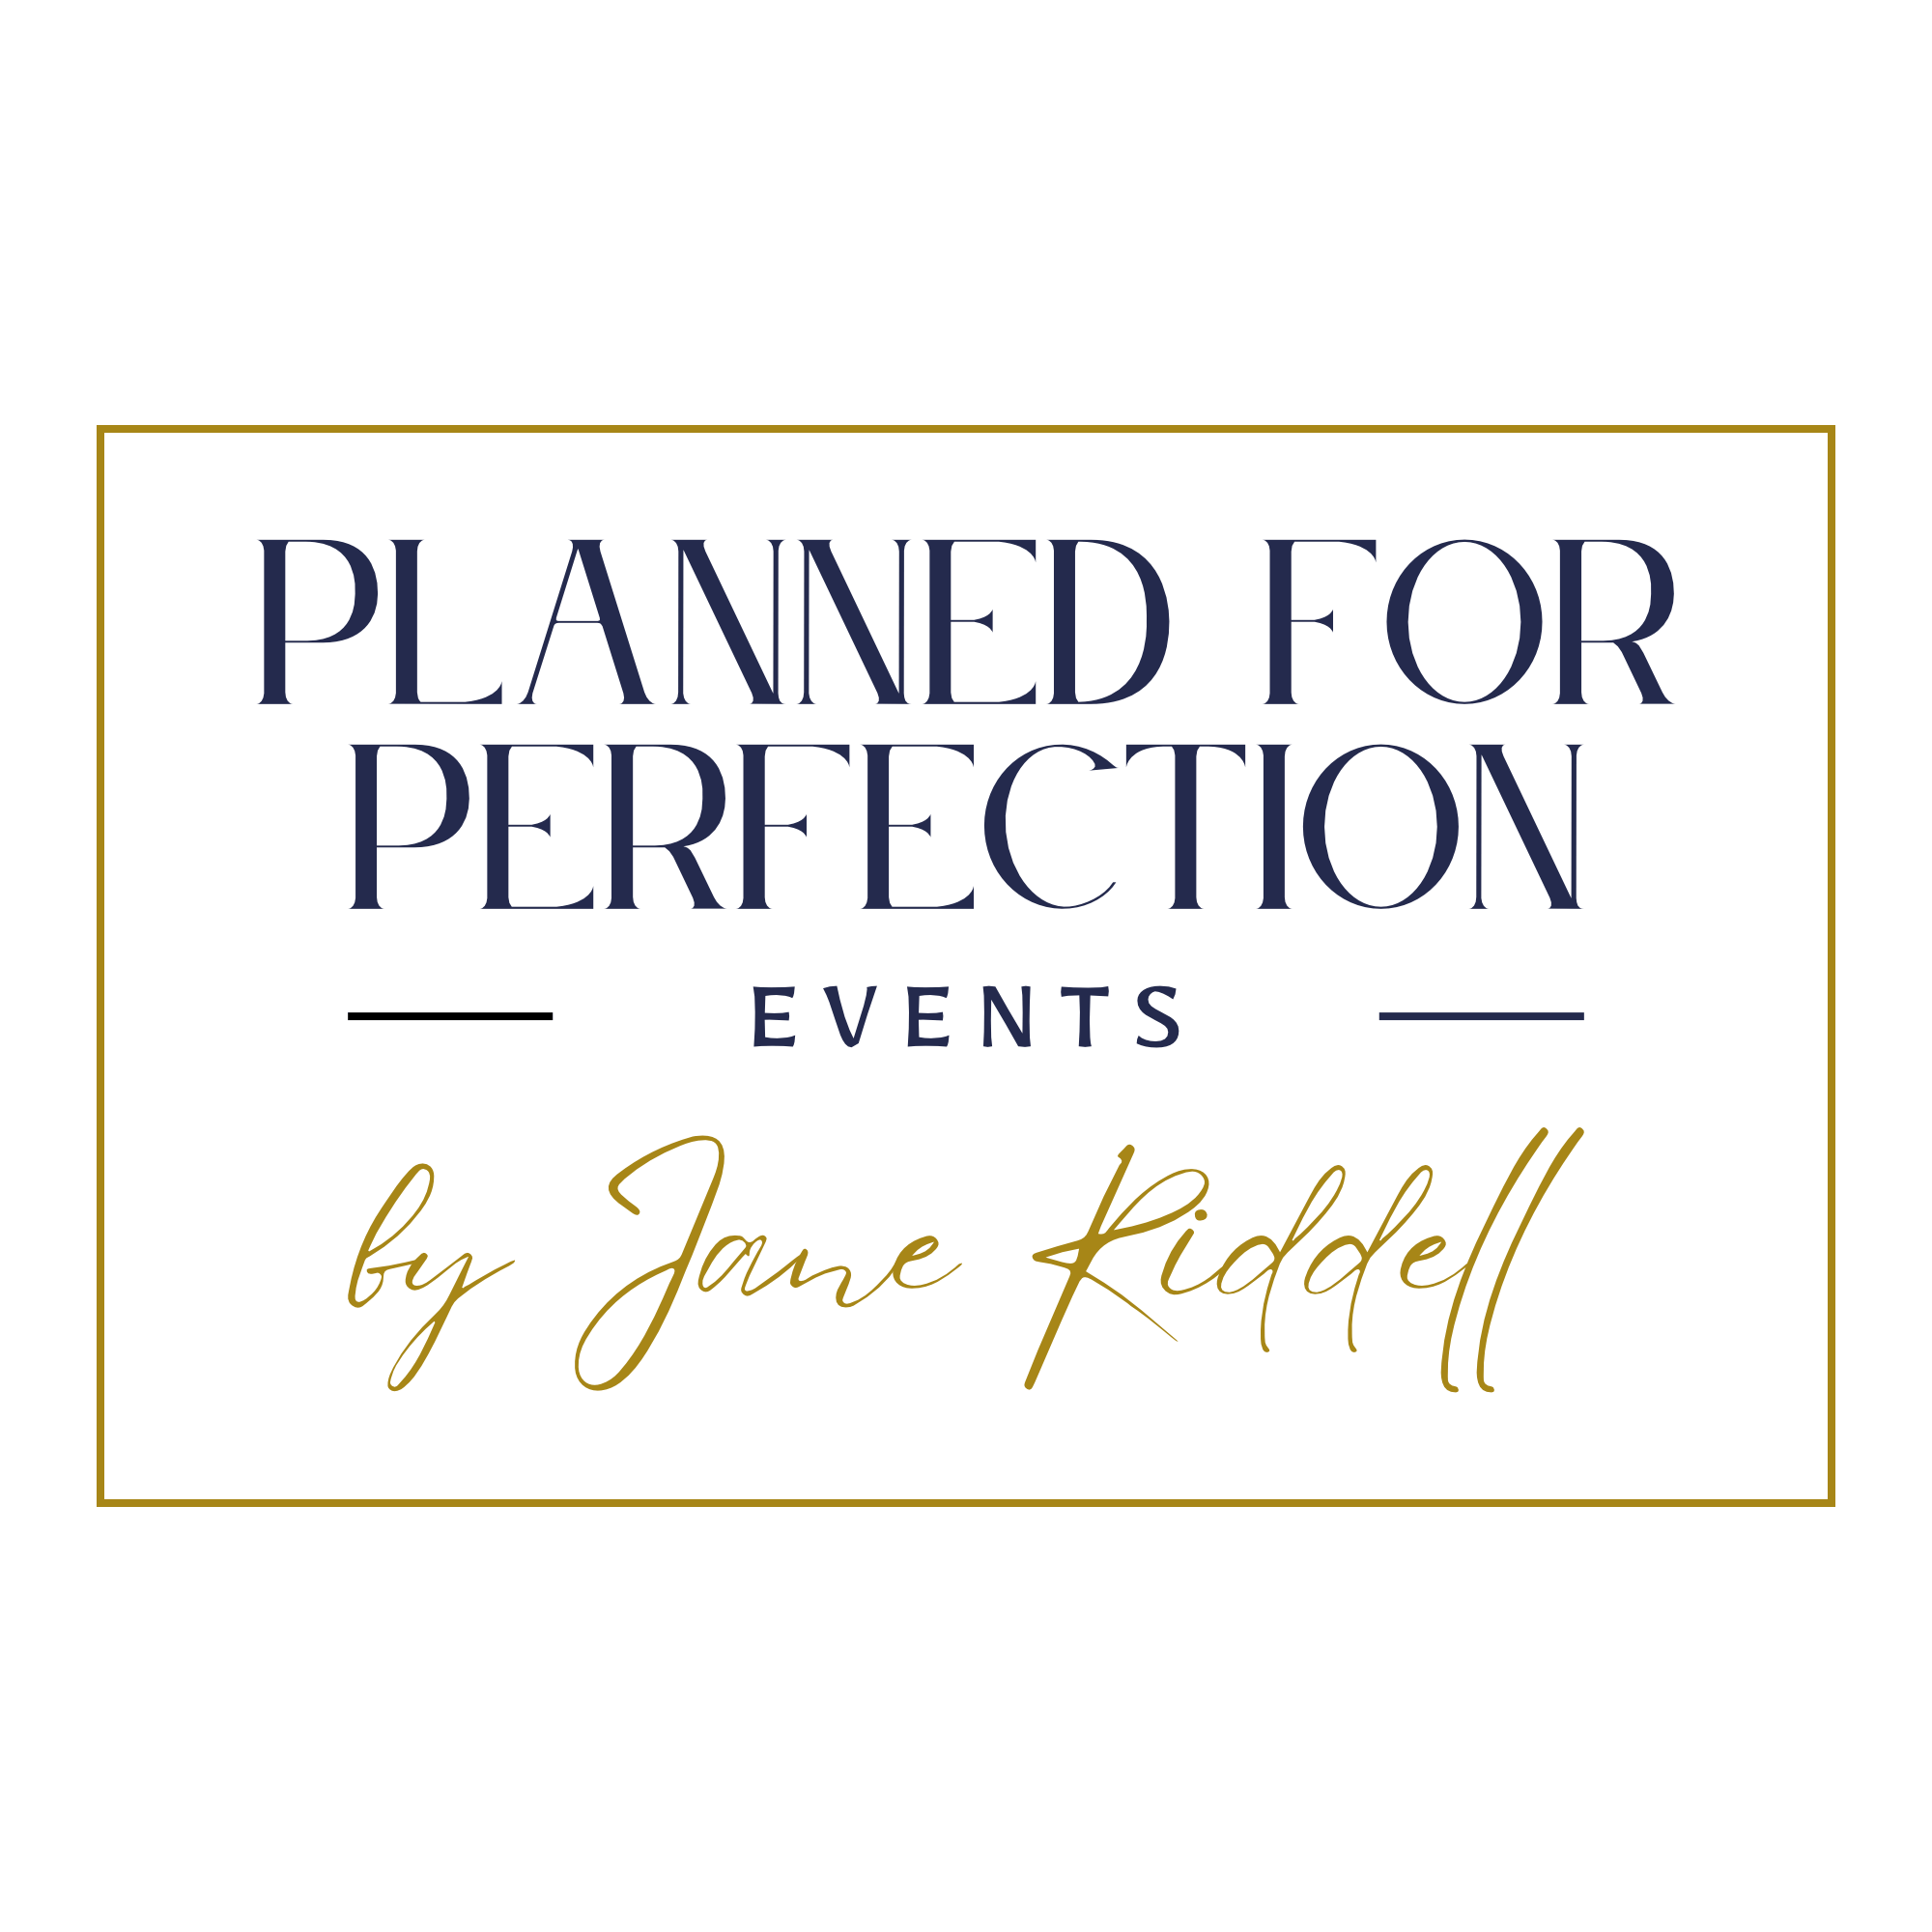 Planned for Perfection Events